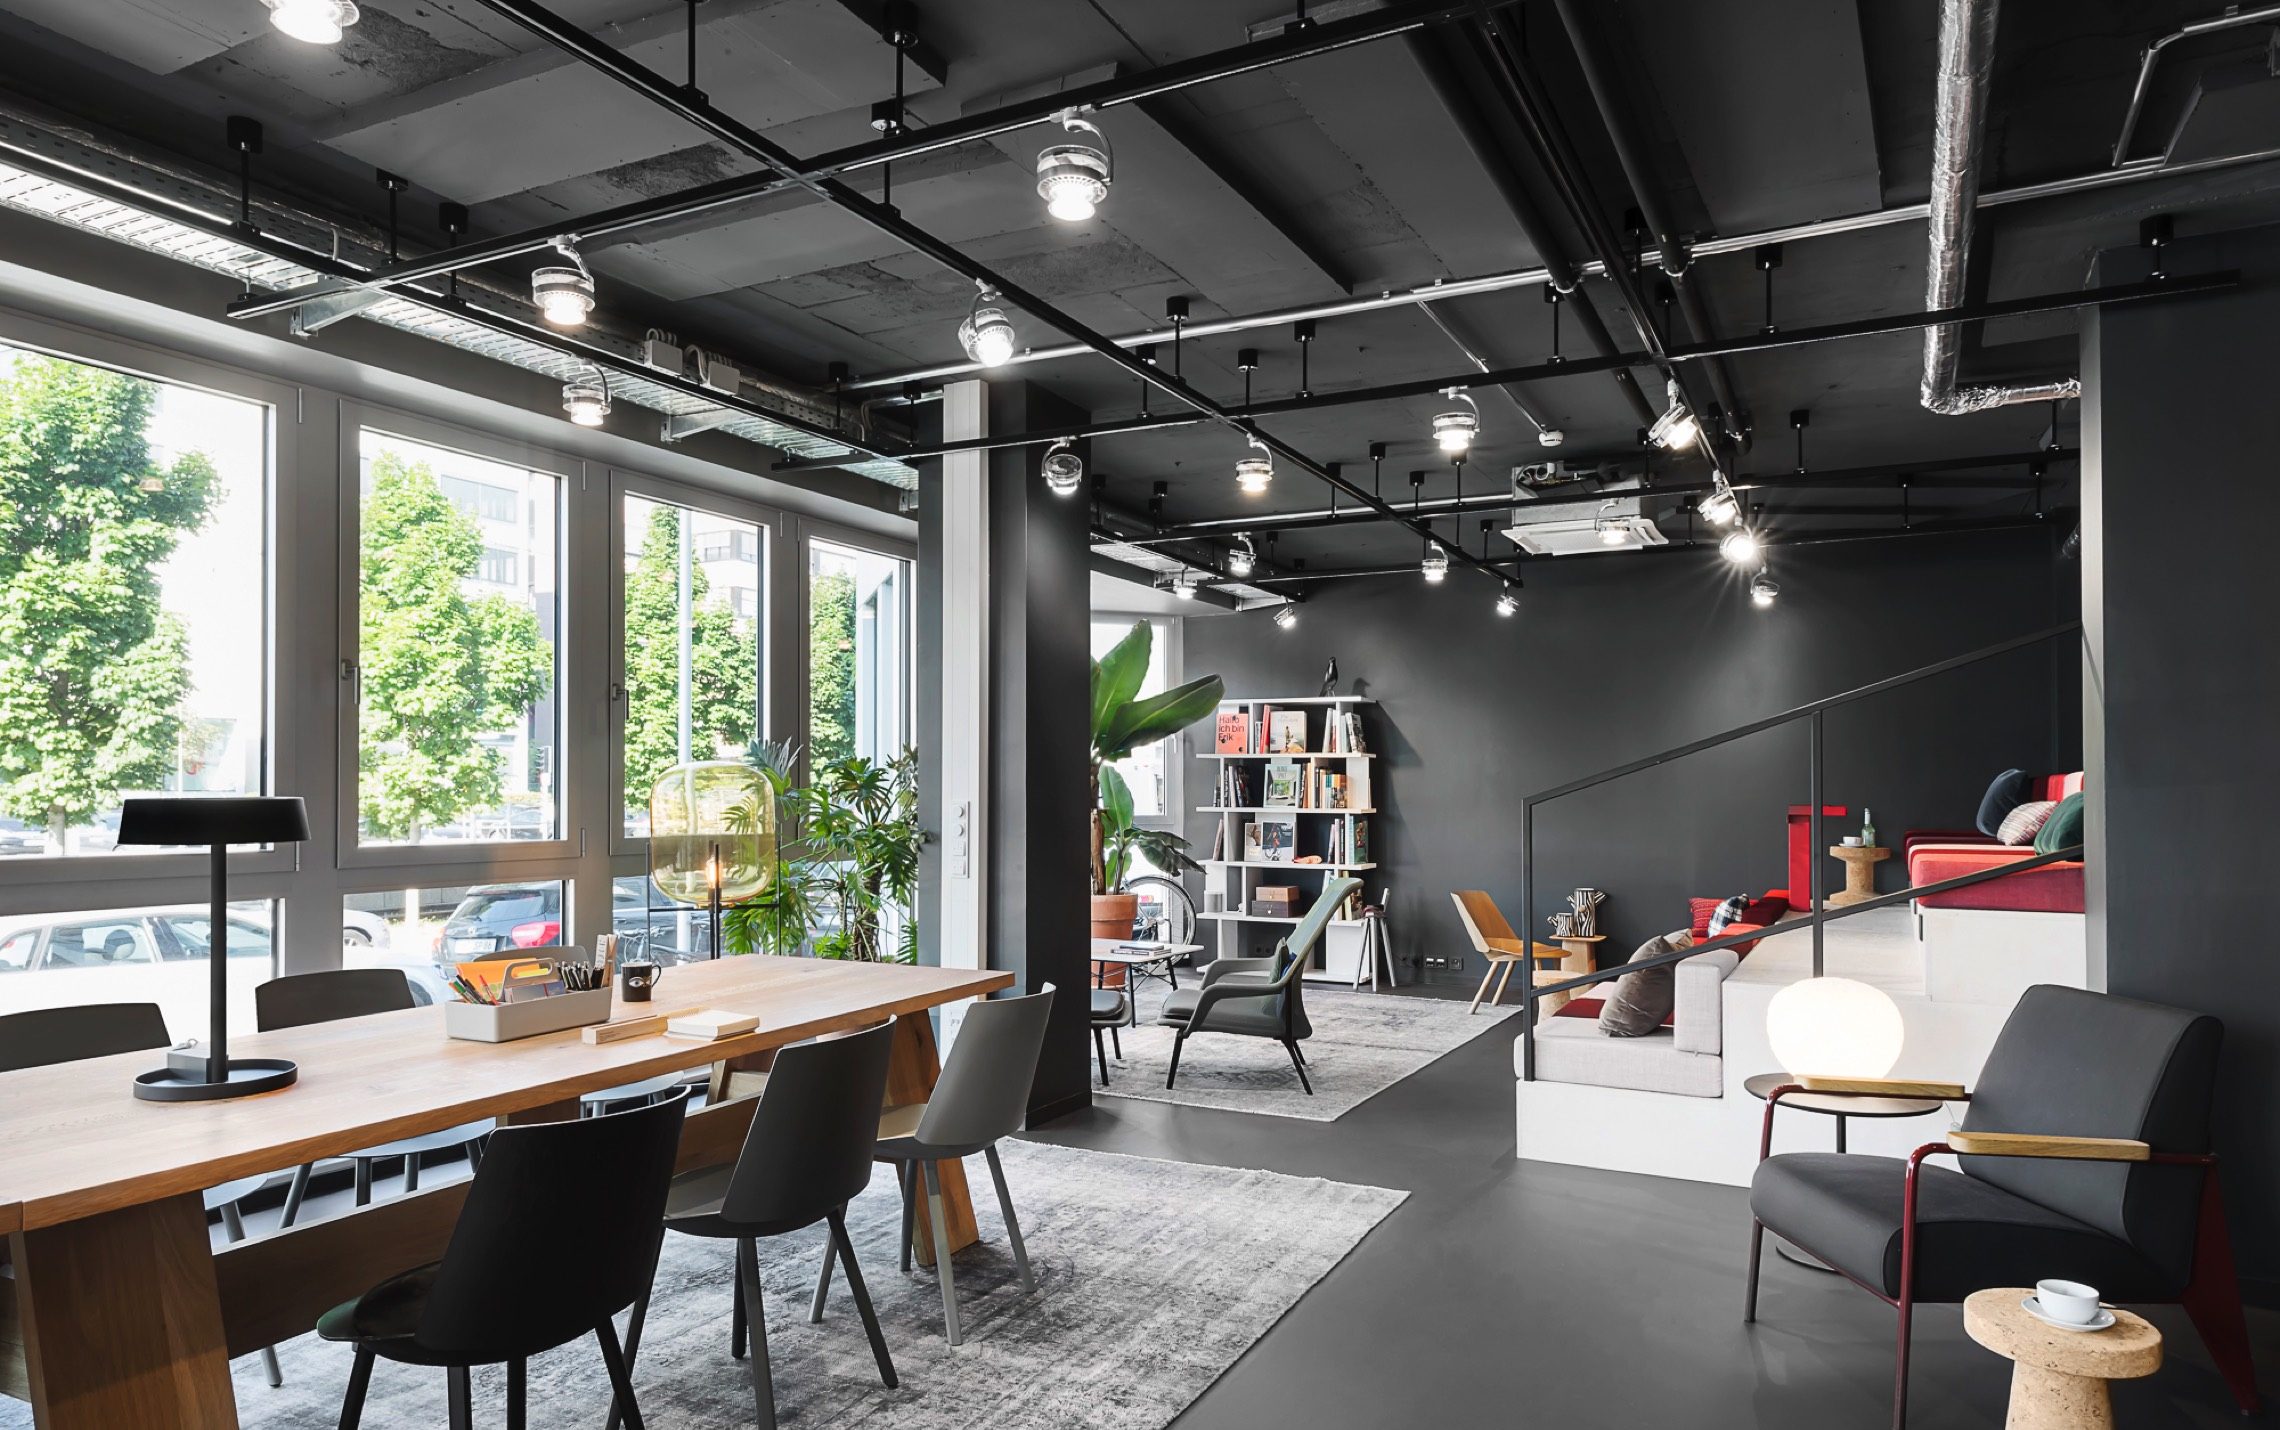 New work atmosphere in modern work environment - Office Inspiration